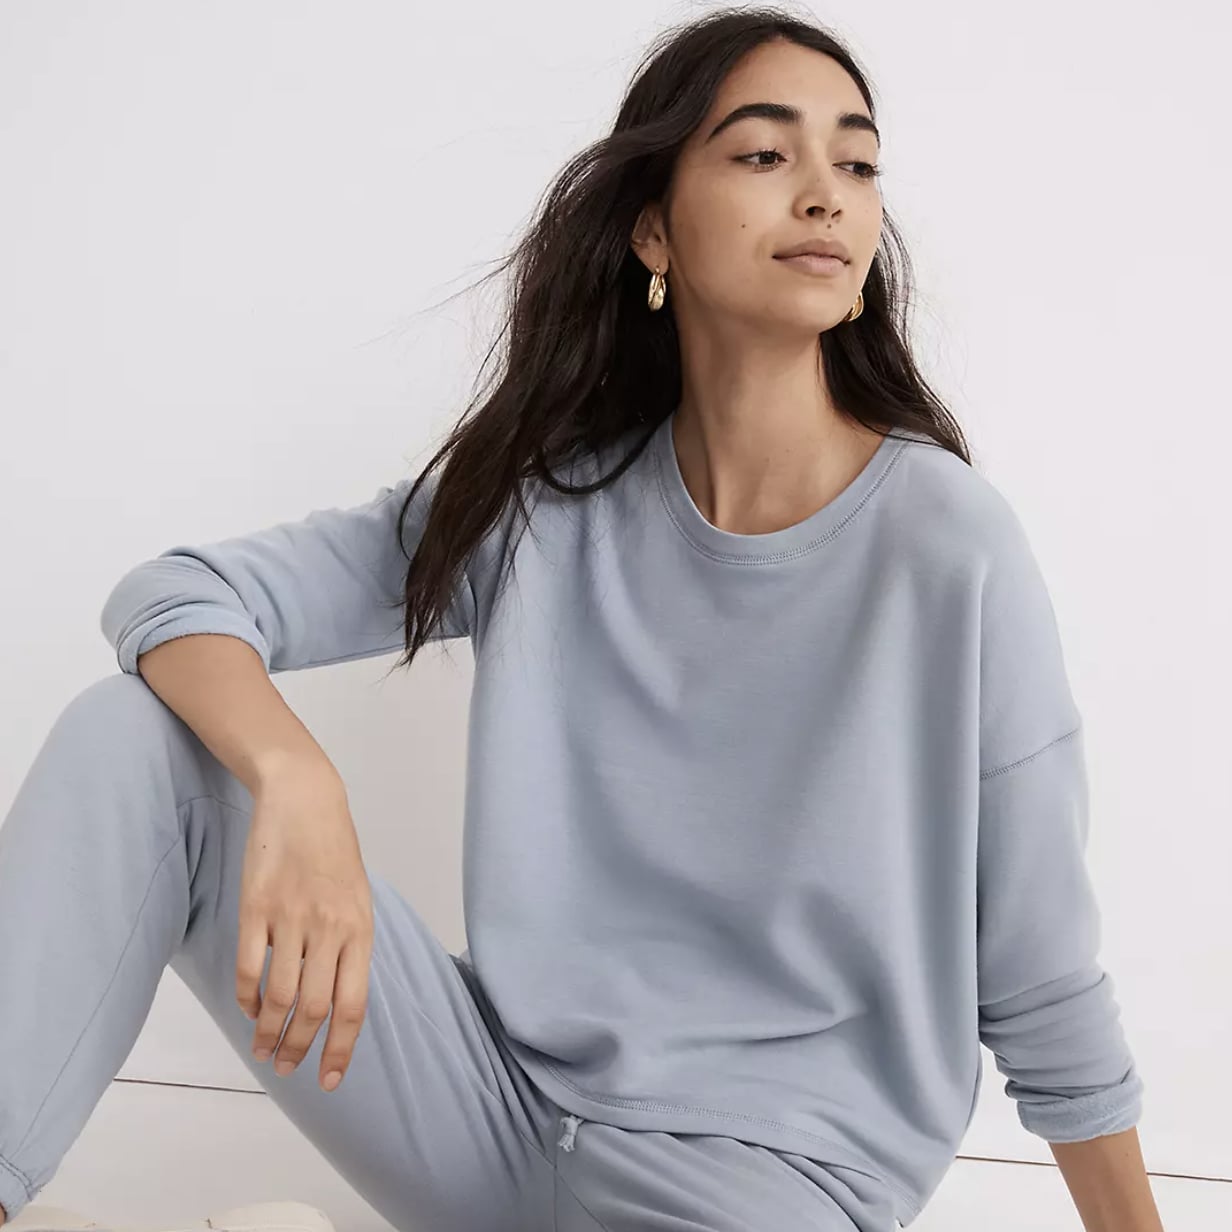 Best Women's Loungewear Sets and Pieces, 2022